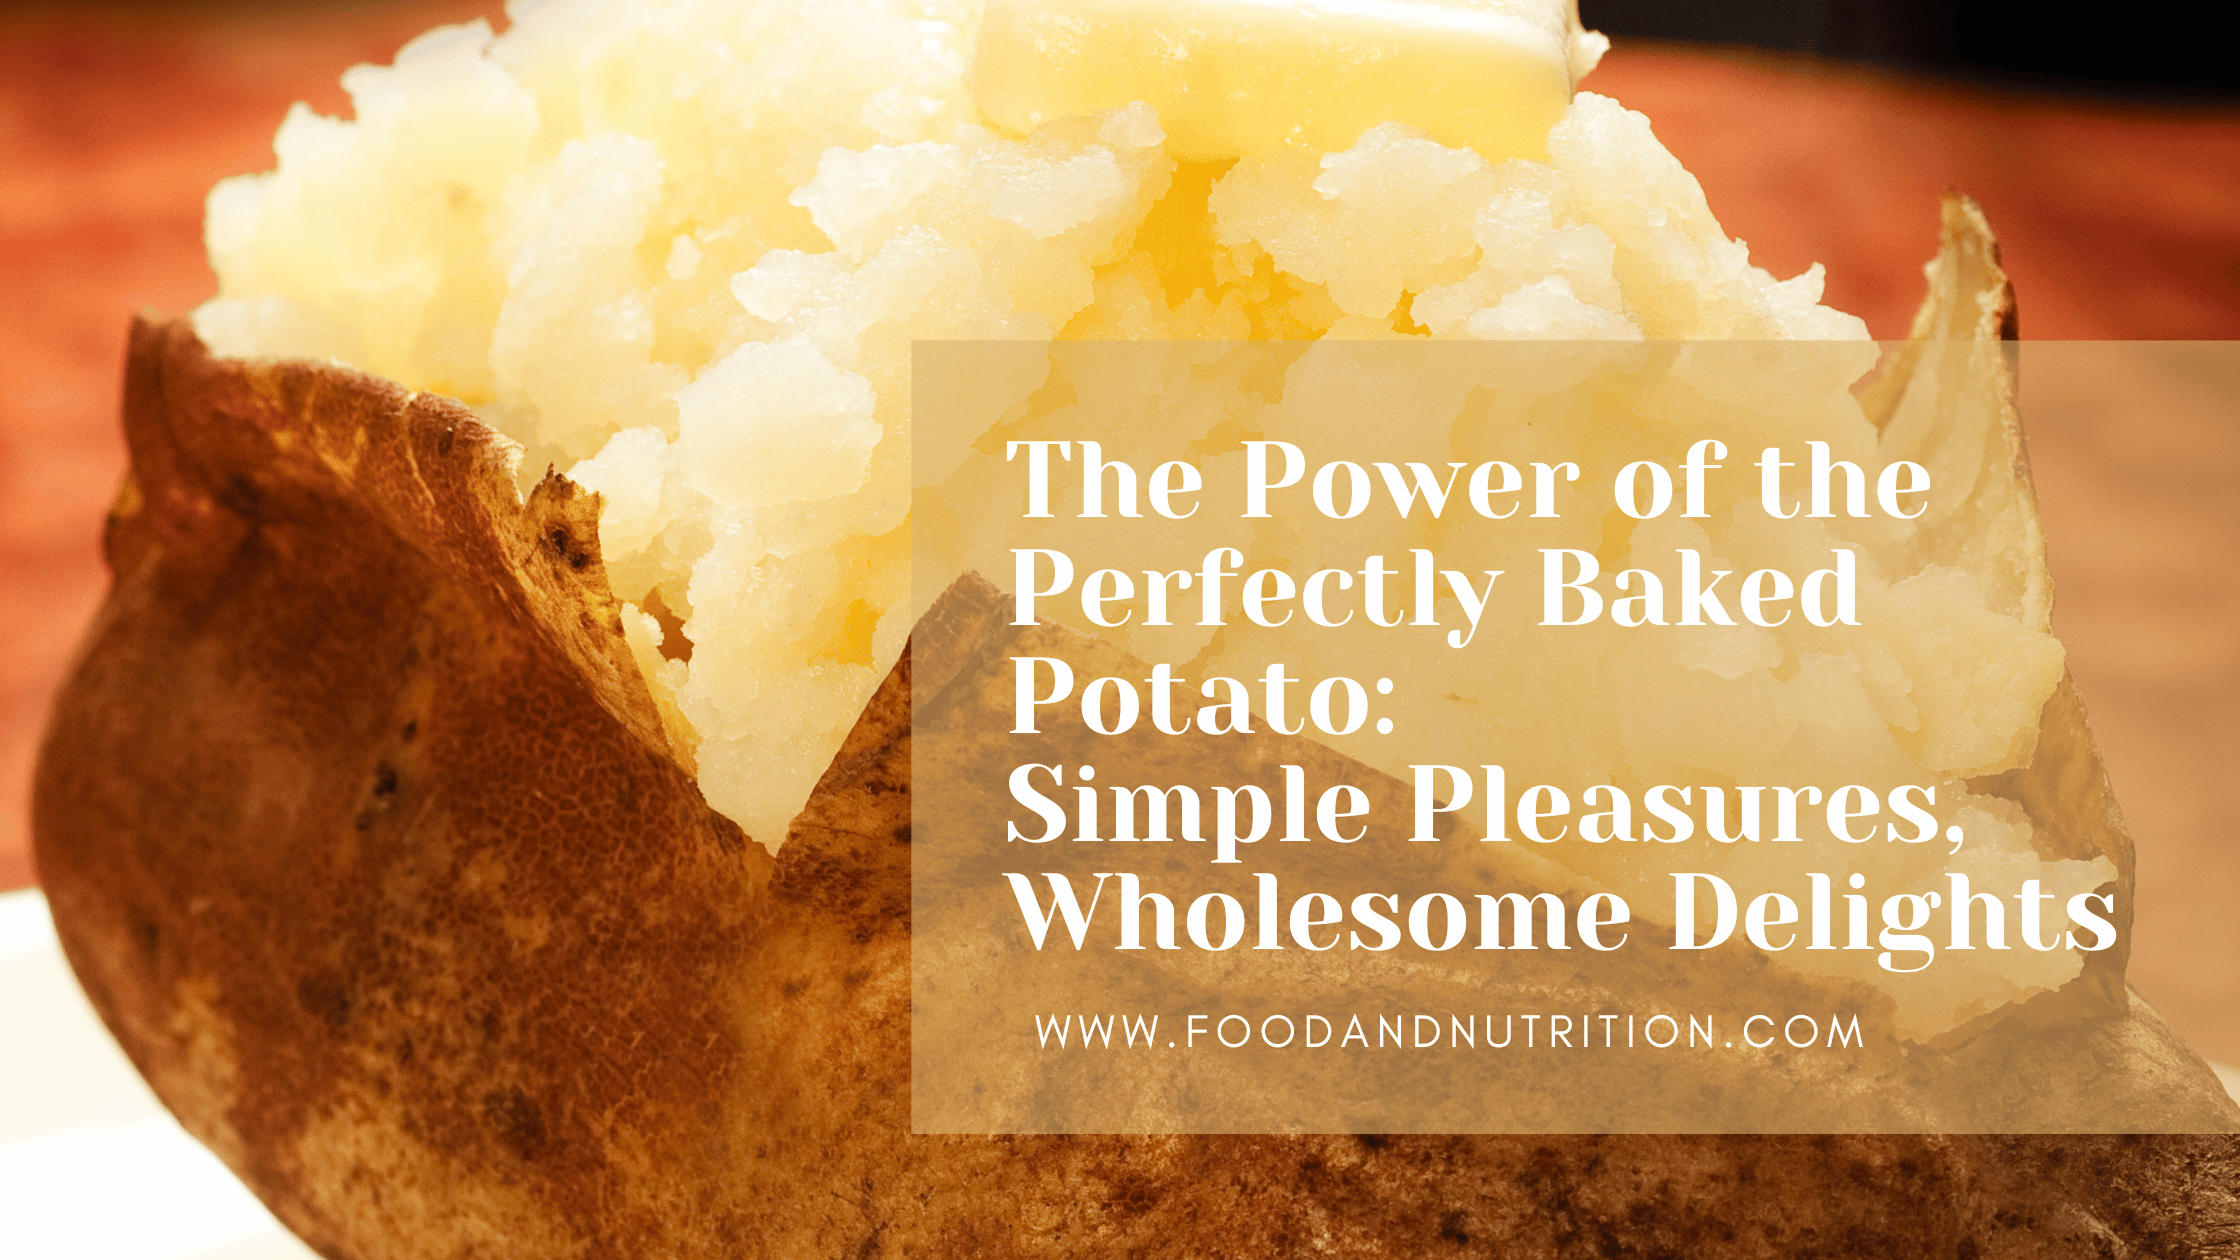 The Power of the Perfectly Baked Potato: Simple Pleasures, Wholesome Delights